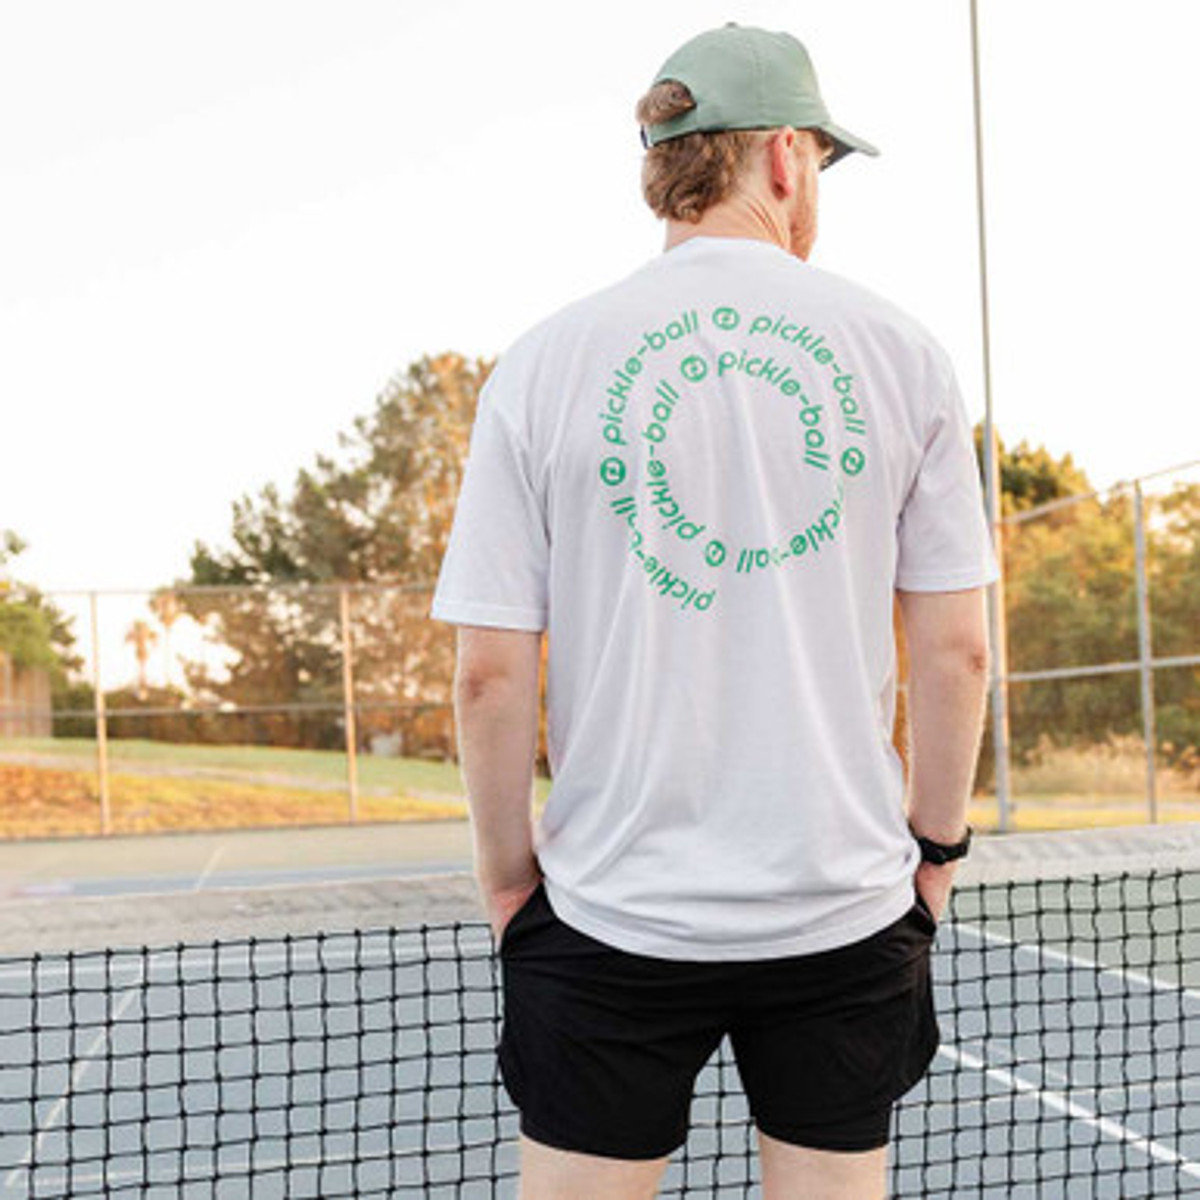 Heritage Pickle-ball Circle Back T-Shirt in White